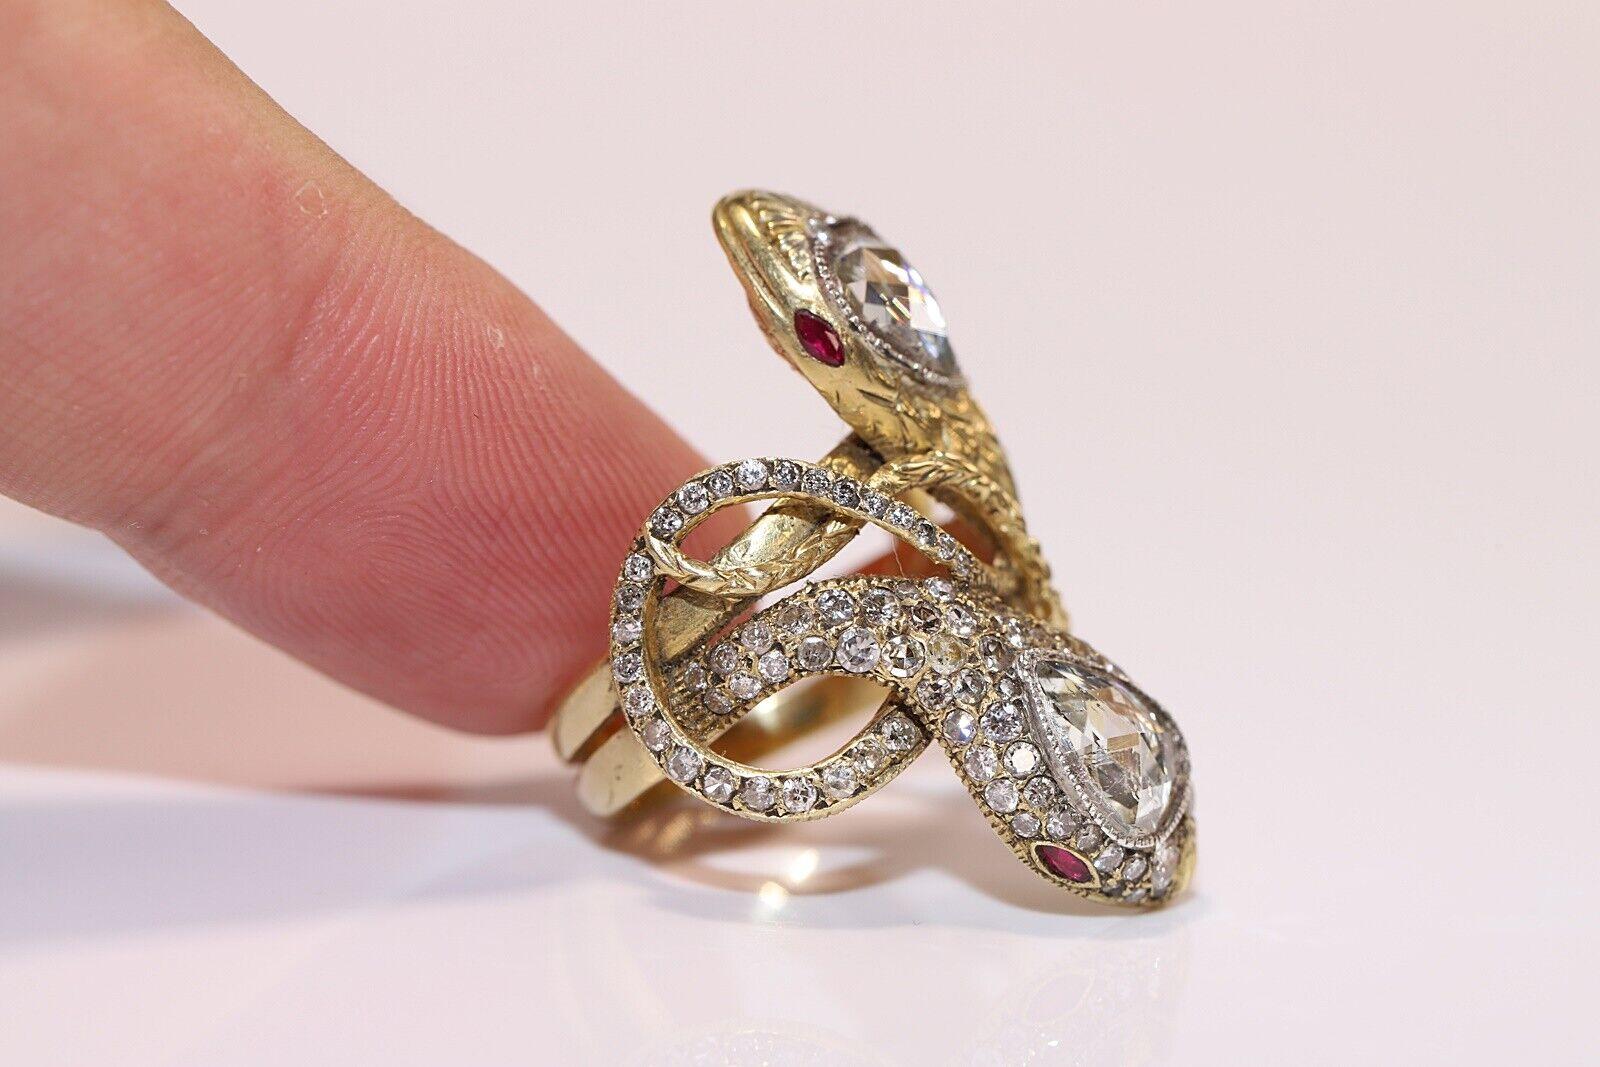 Modern New Handmade 18k Gold Natural Diamond And Ruby Decorated Big Strong Snake Ring For Sale